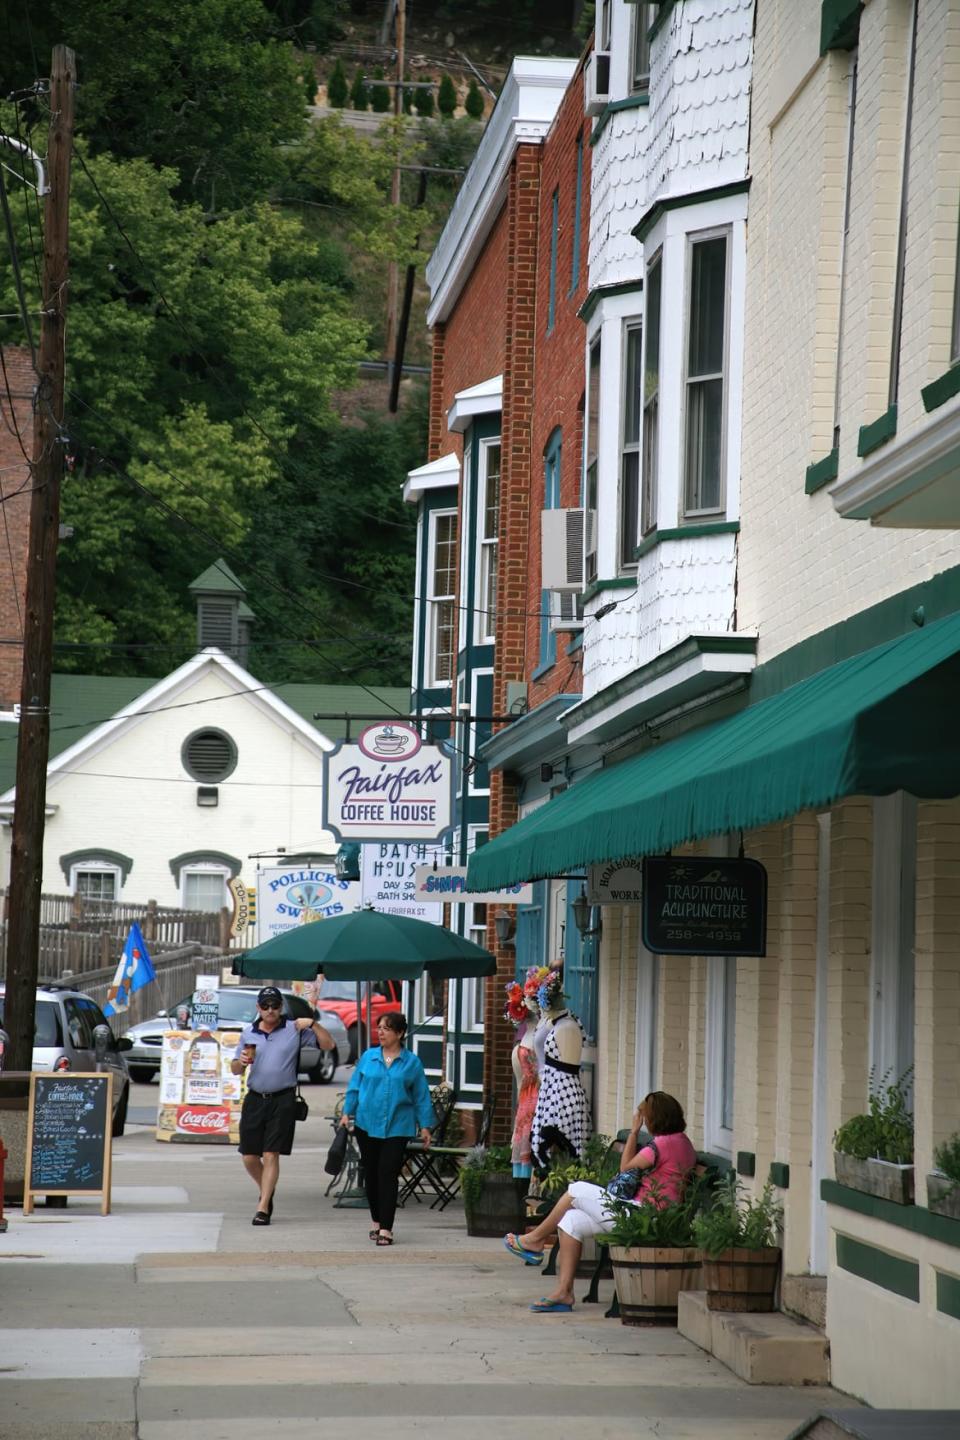 <div class="inline-image__caption"><p>People walking around the shops and restaurants on Main Street in historic Berkeley Springs, West Virginia.</p></div> <div class="inline-image__credit">Getty Images</div>